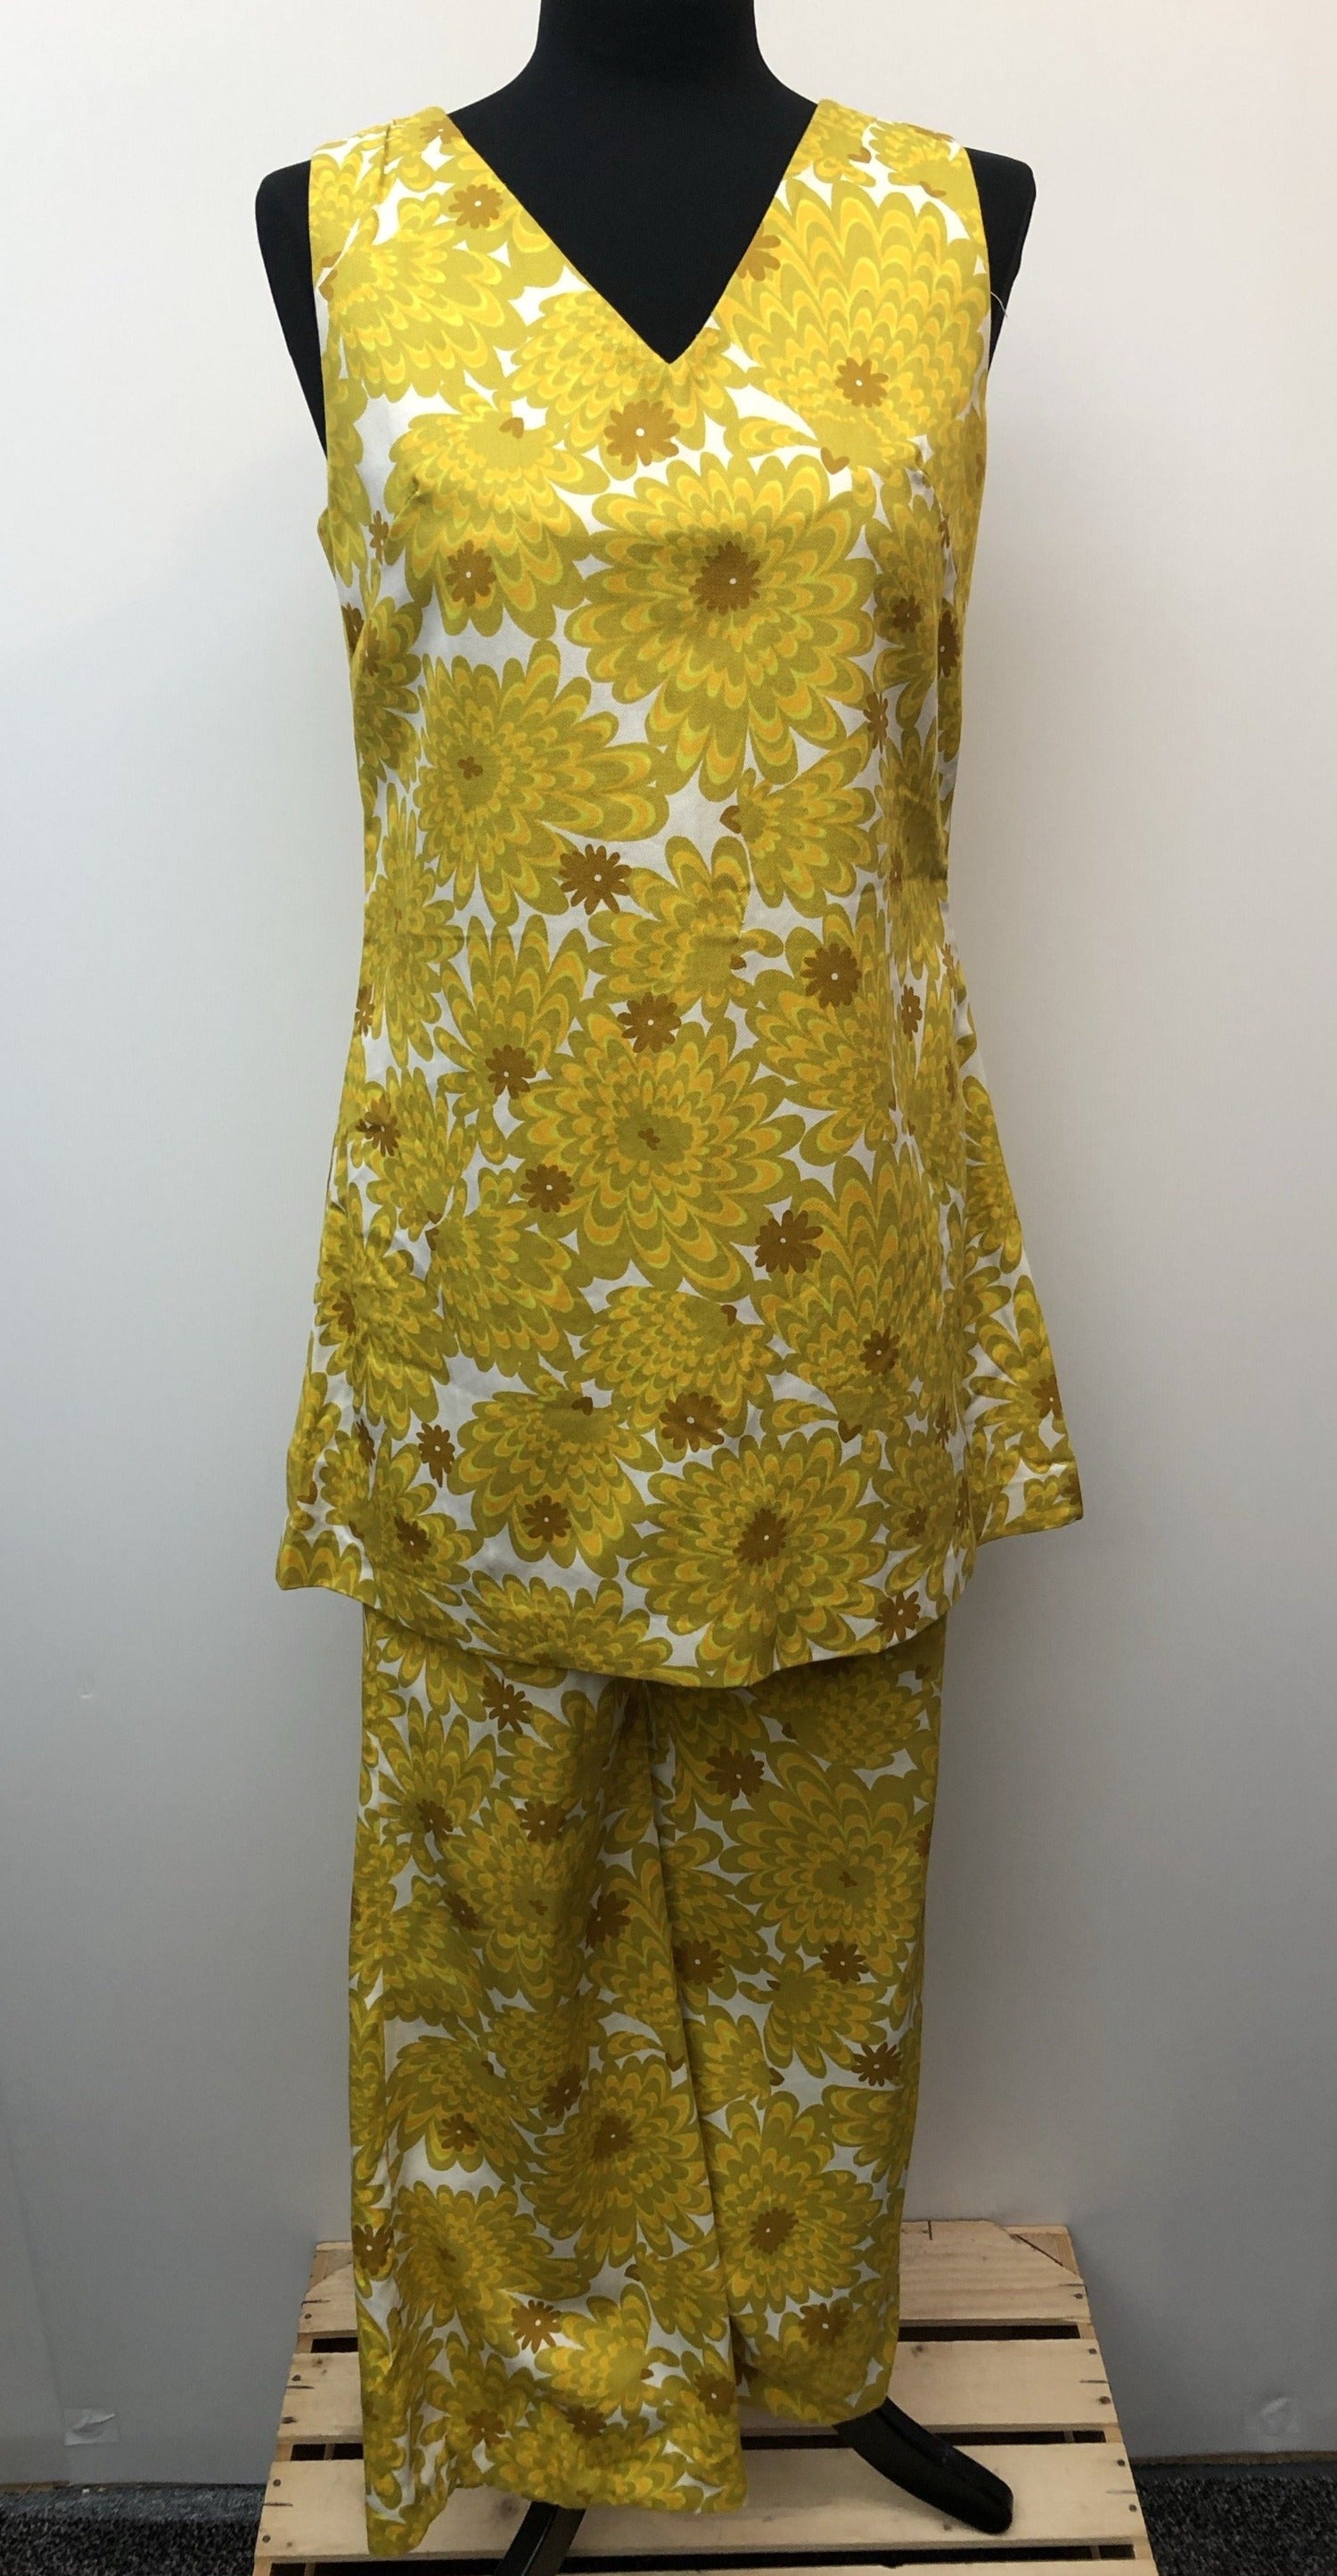 Yellow  womens  Wide Leg  vintage  Urban Village Vintage  tunic top  tunic  trousers  psychedelic  psych  hippy  Flower Power  floral  flares  Cotton  boho  1960s  1960  10